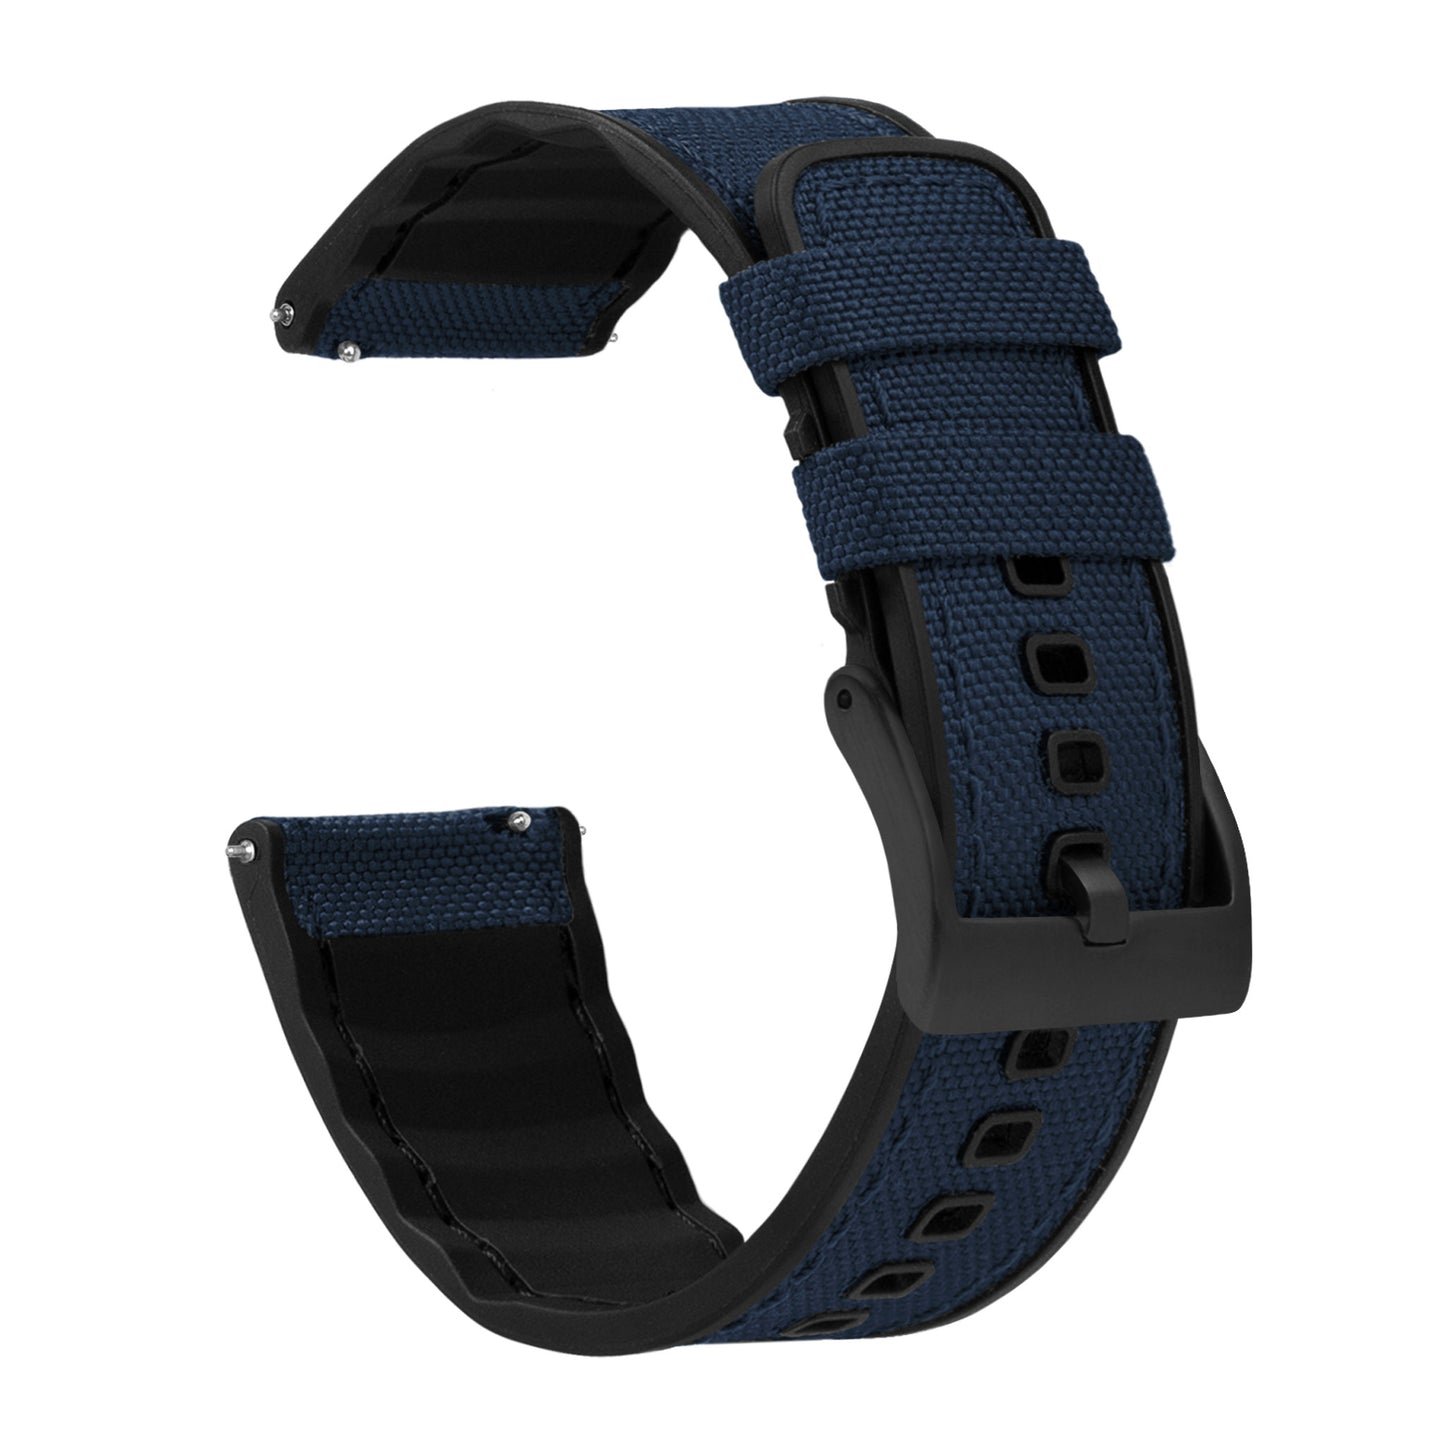 Navy Blue Cordura Fabric and Silicone Hybrid - Barton Watch Bands